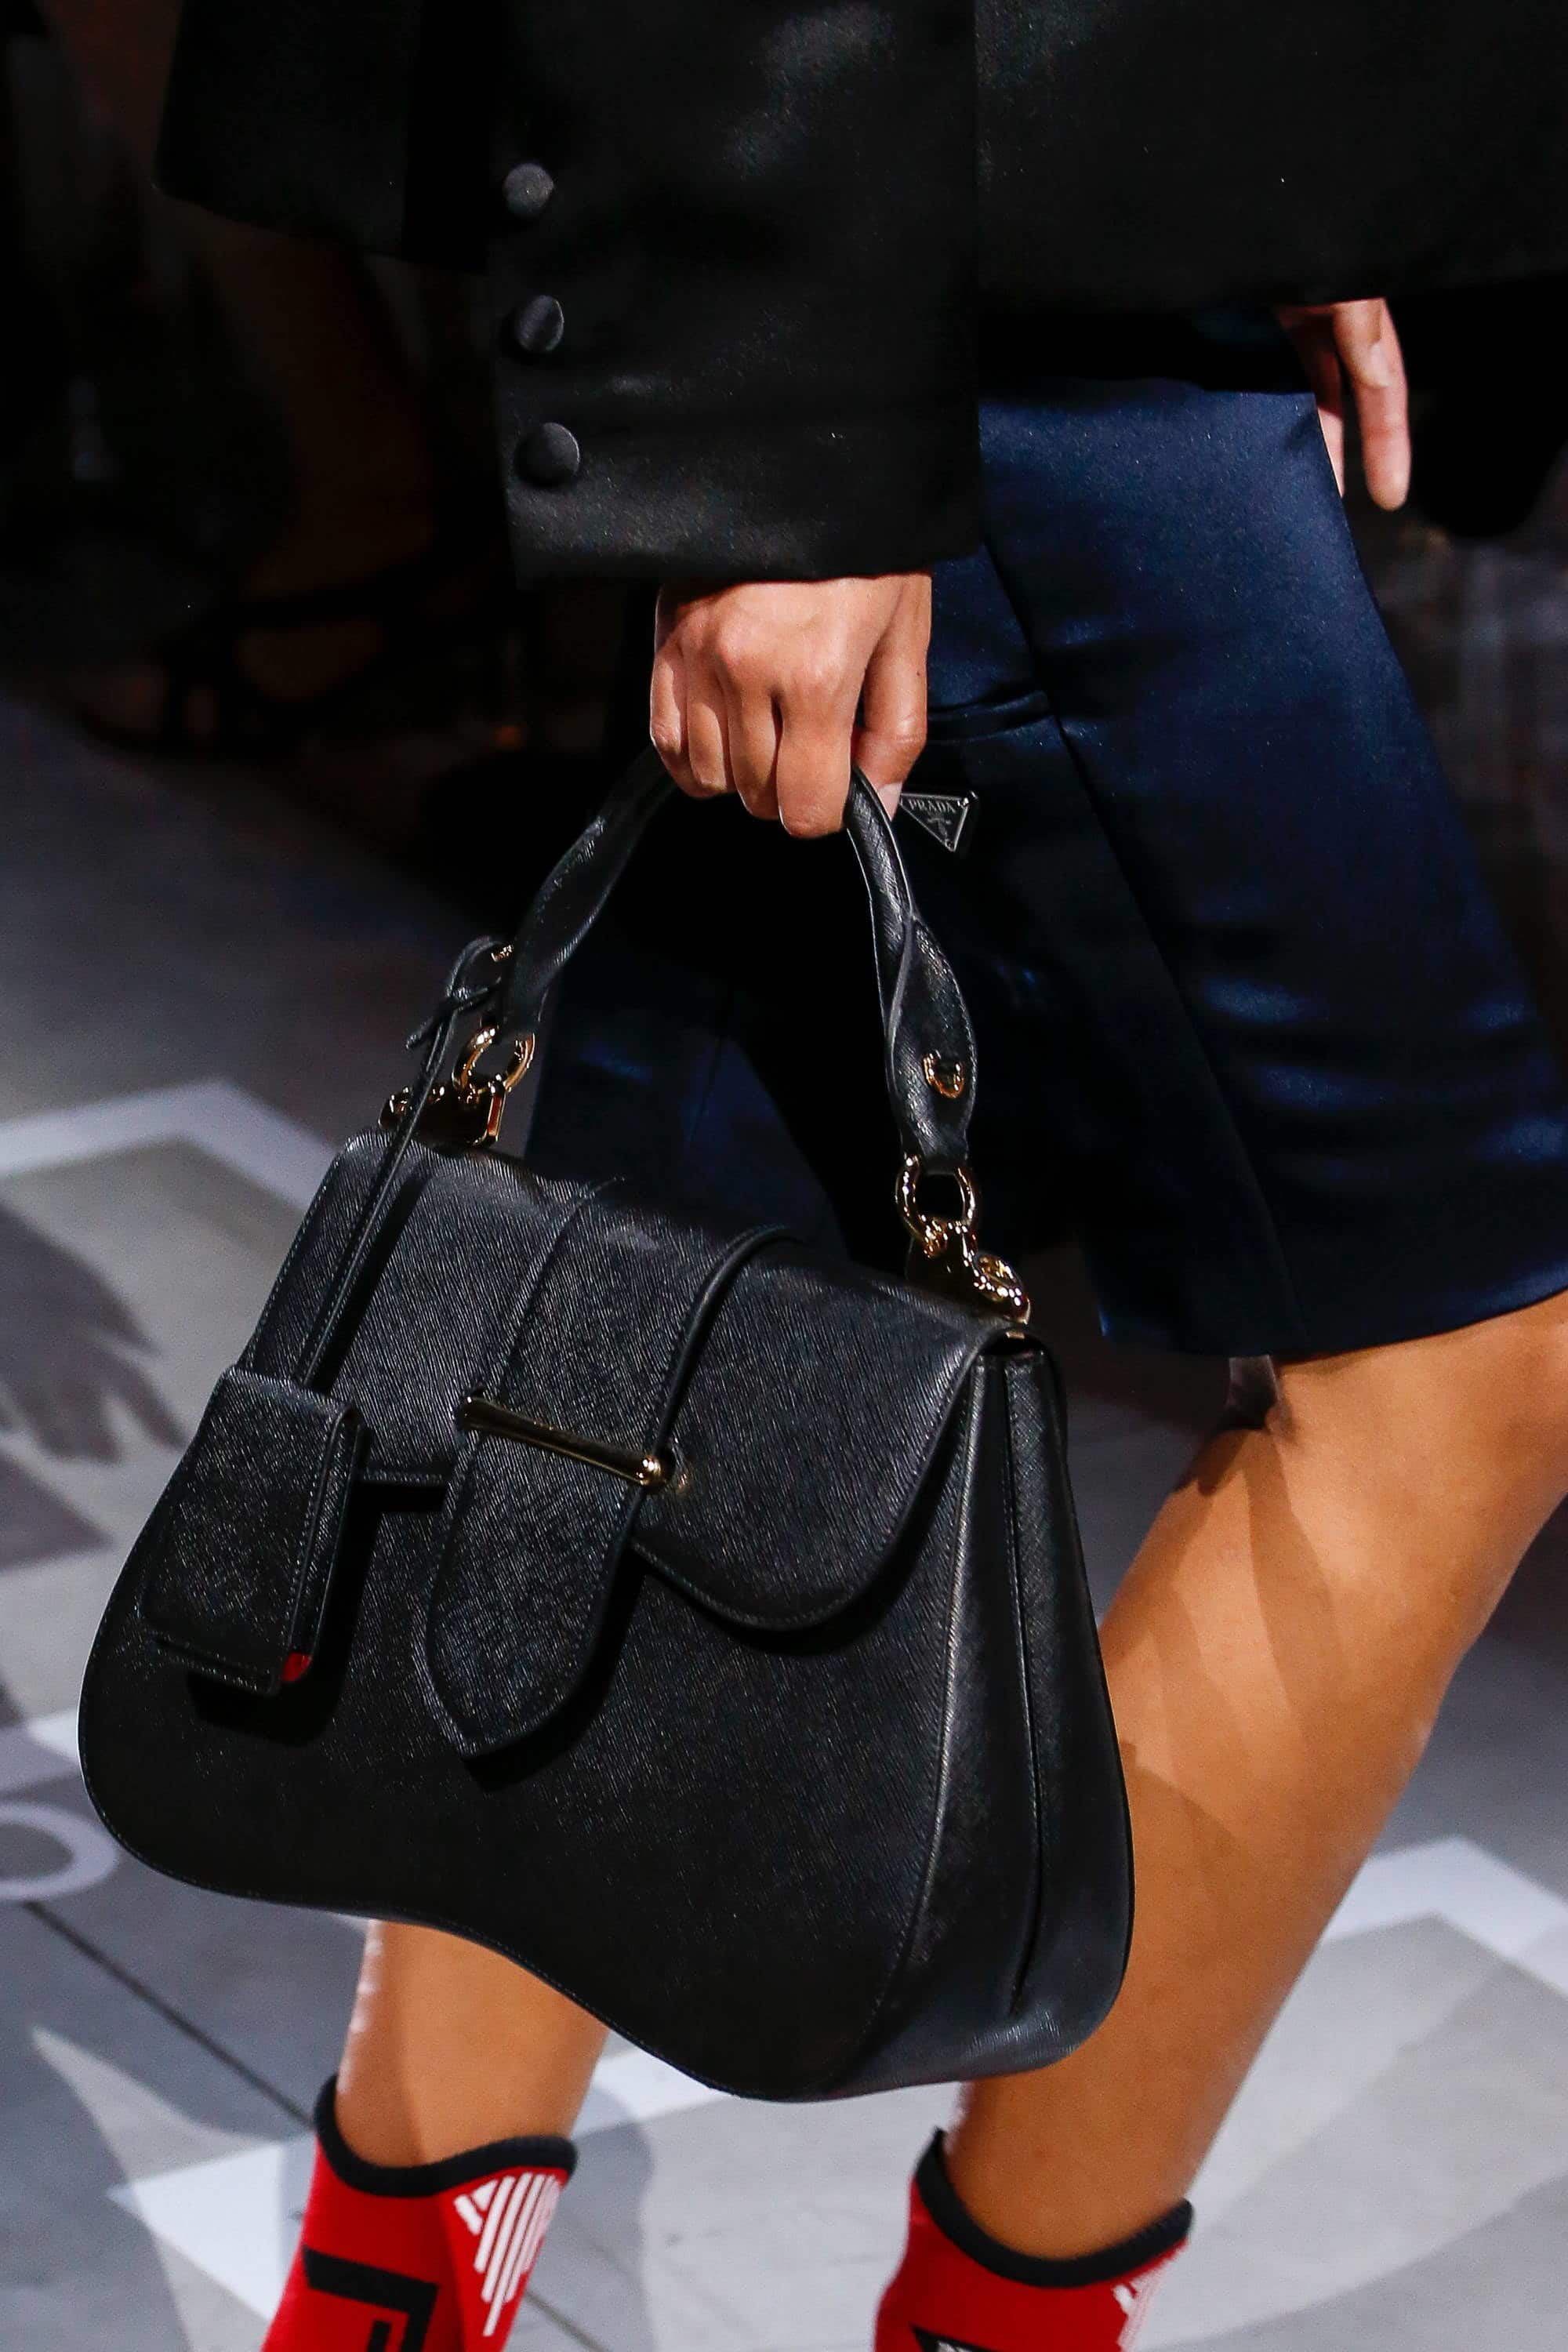 Confirmed: Prada Sidonie is the bag that will dominate Spring 2019